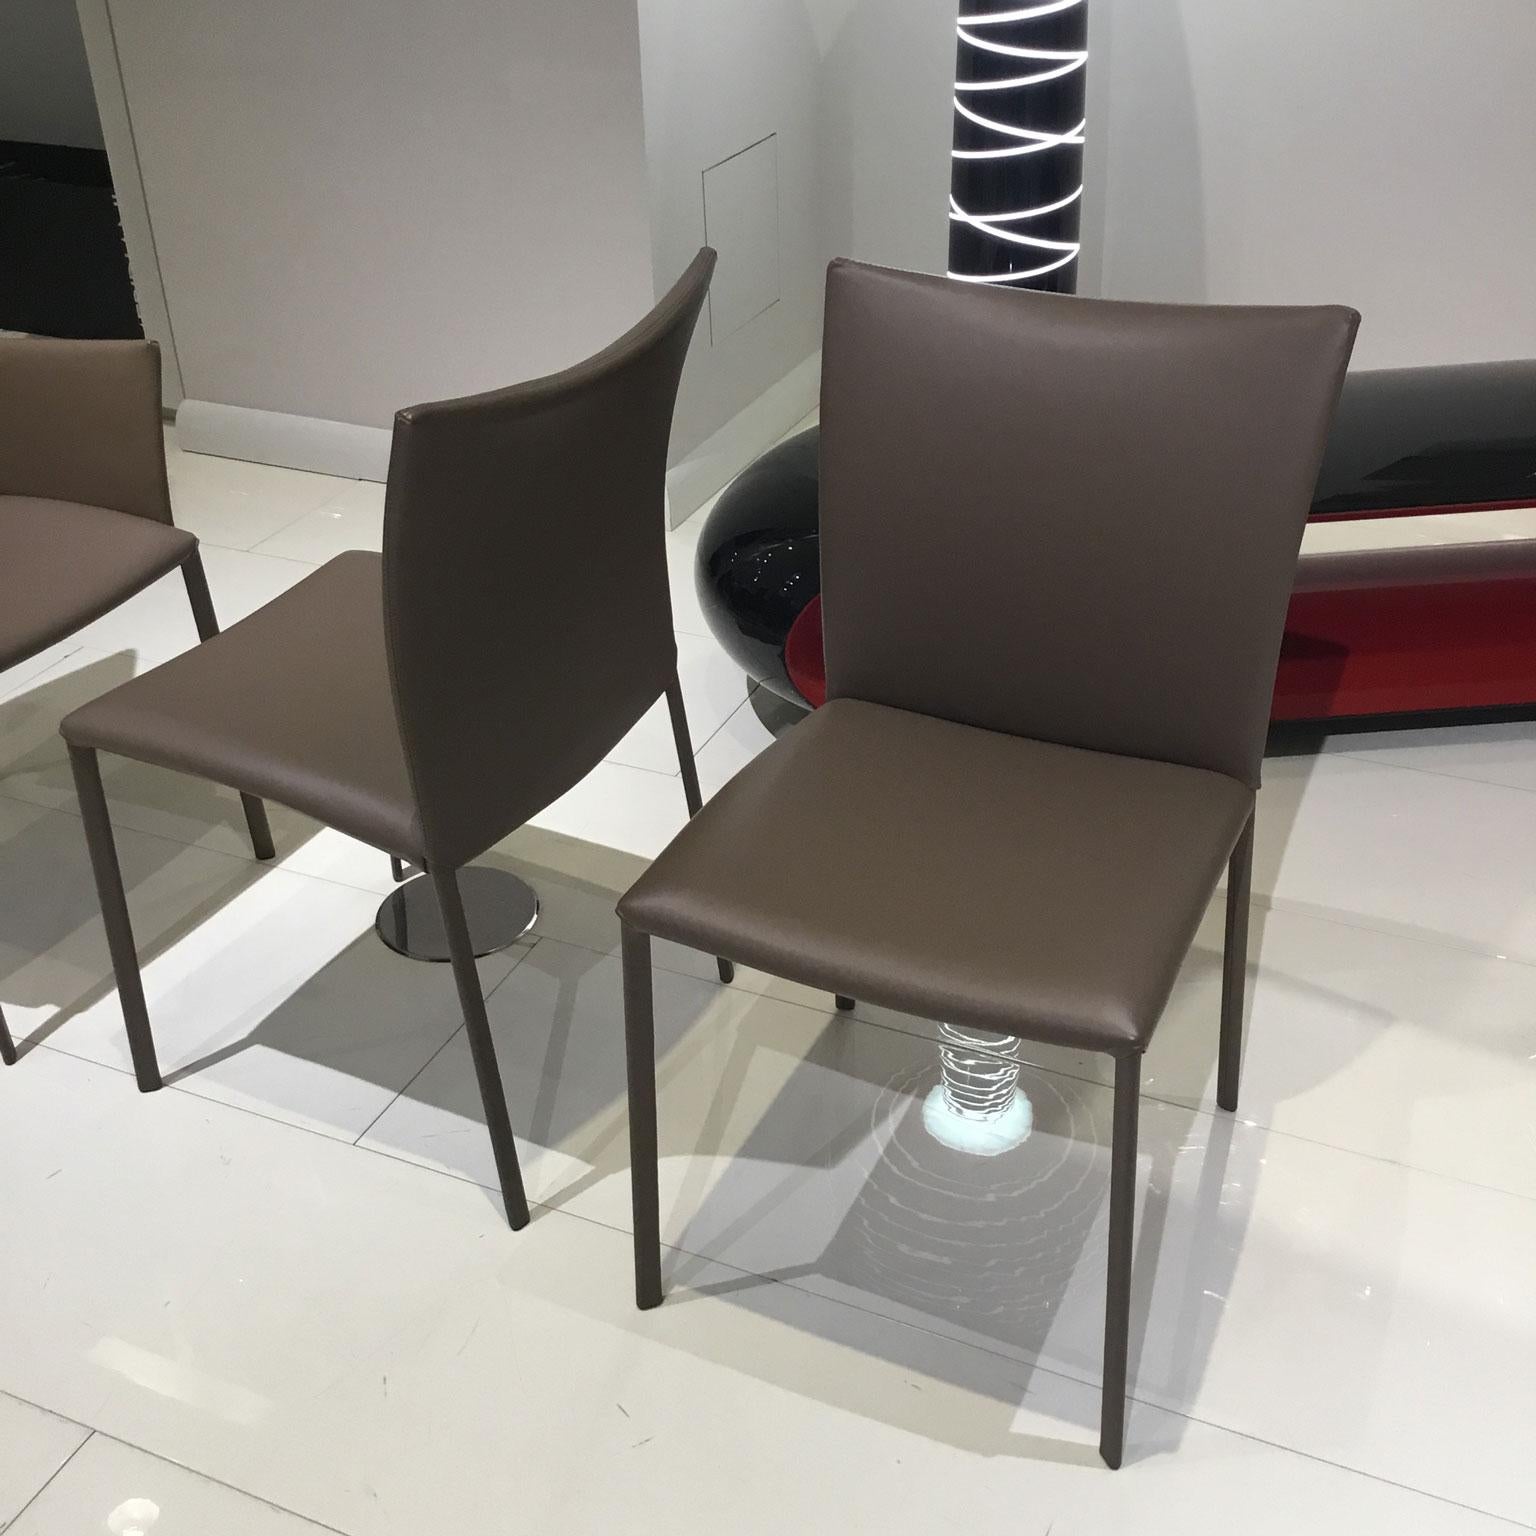 Nobilie soft dining chairs by Gino Carollo for Draenert

The extra-ordinary high sitting comfort is achieved by the flexible backrest with a new variant, softly upholstered at seat, back and legs. This chair from glove-soft leather is suitable for